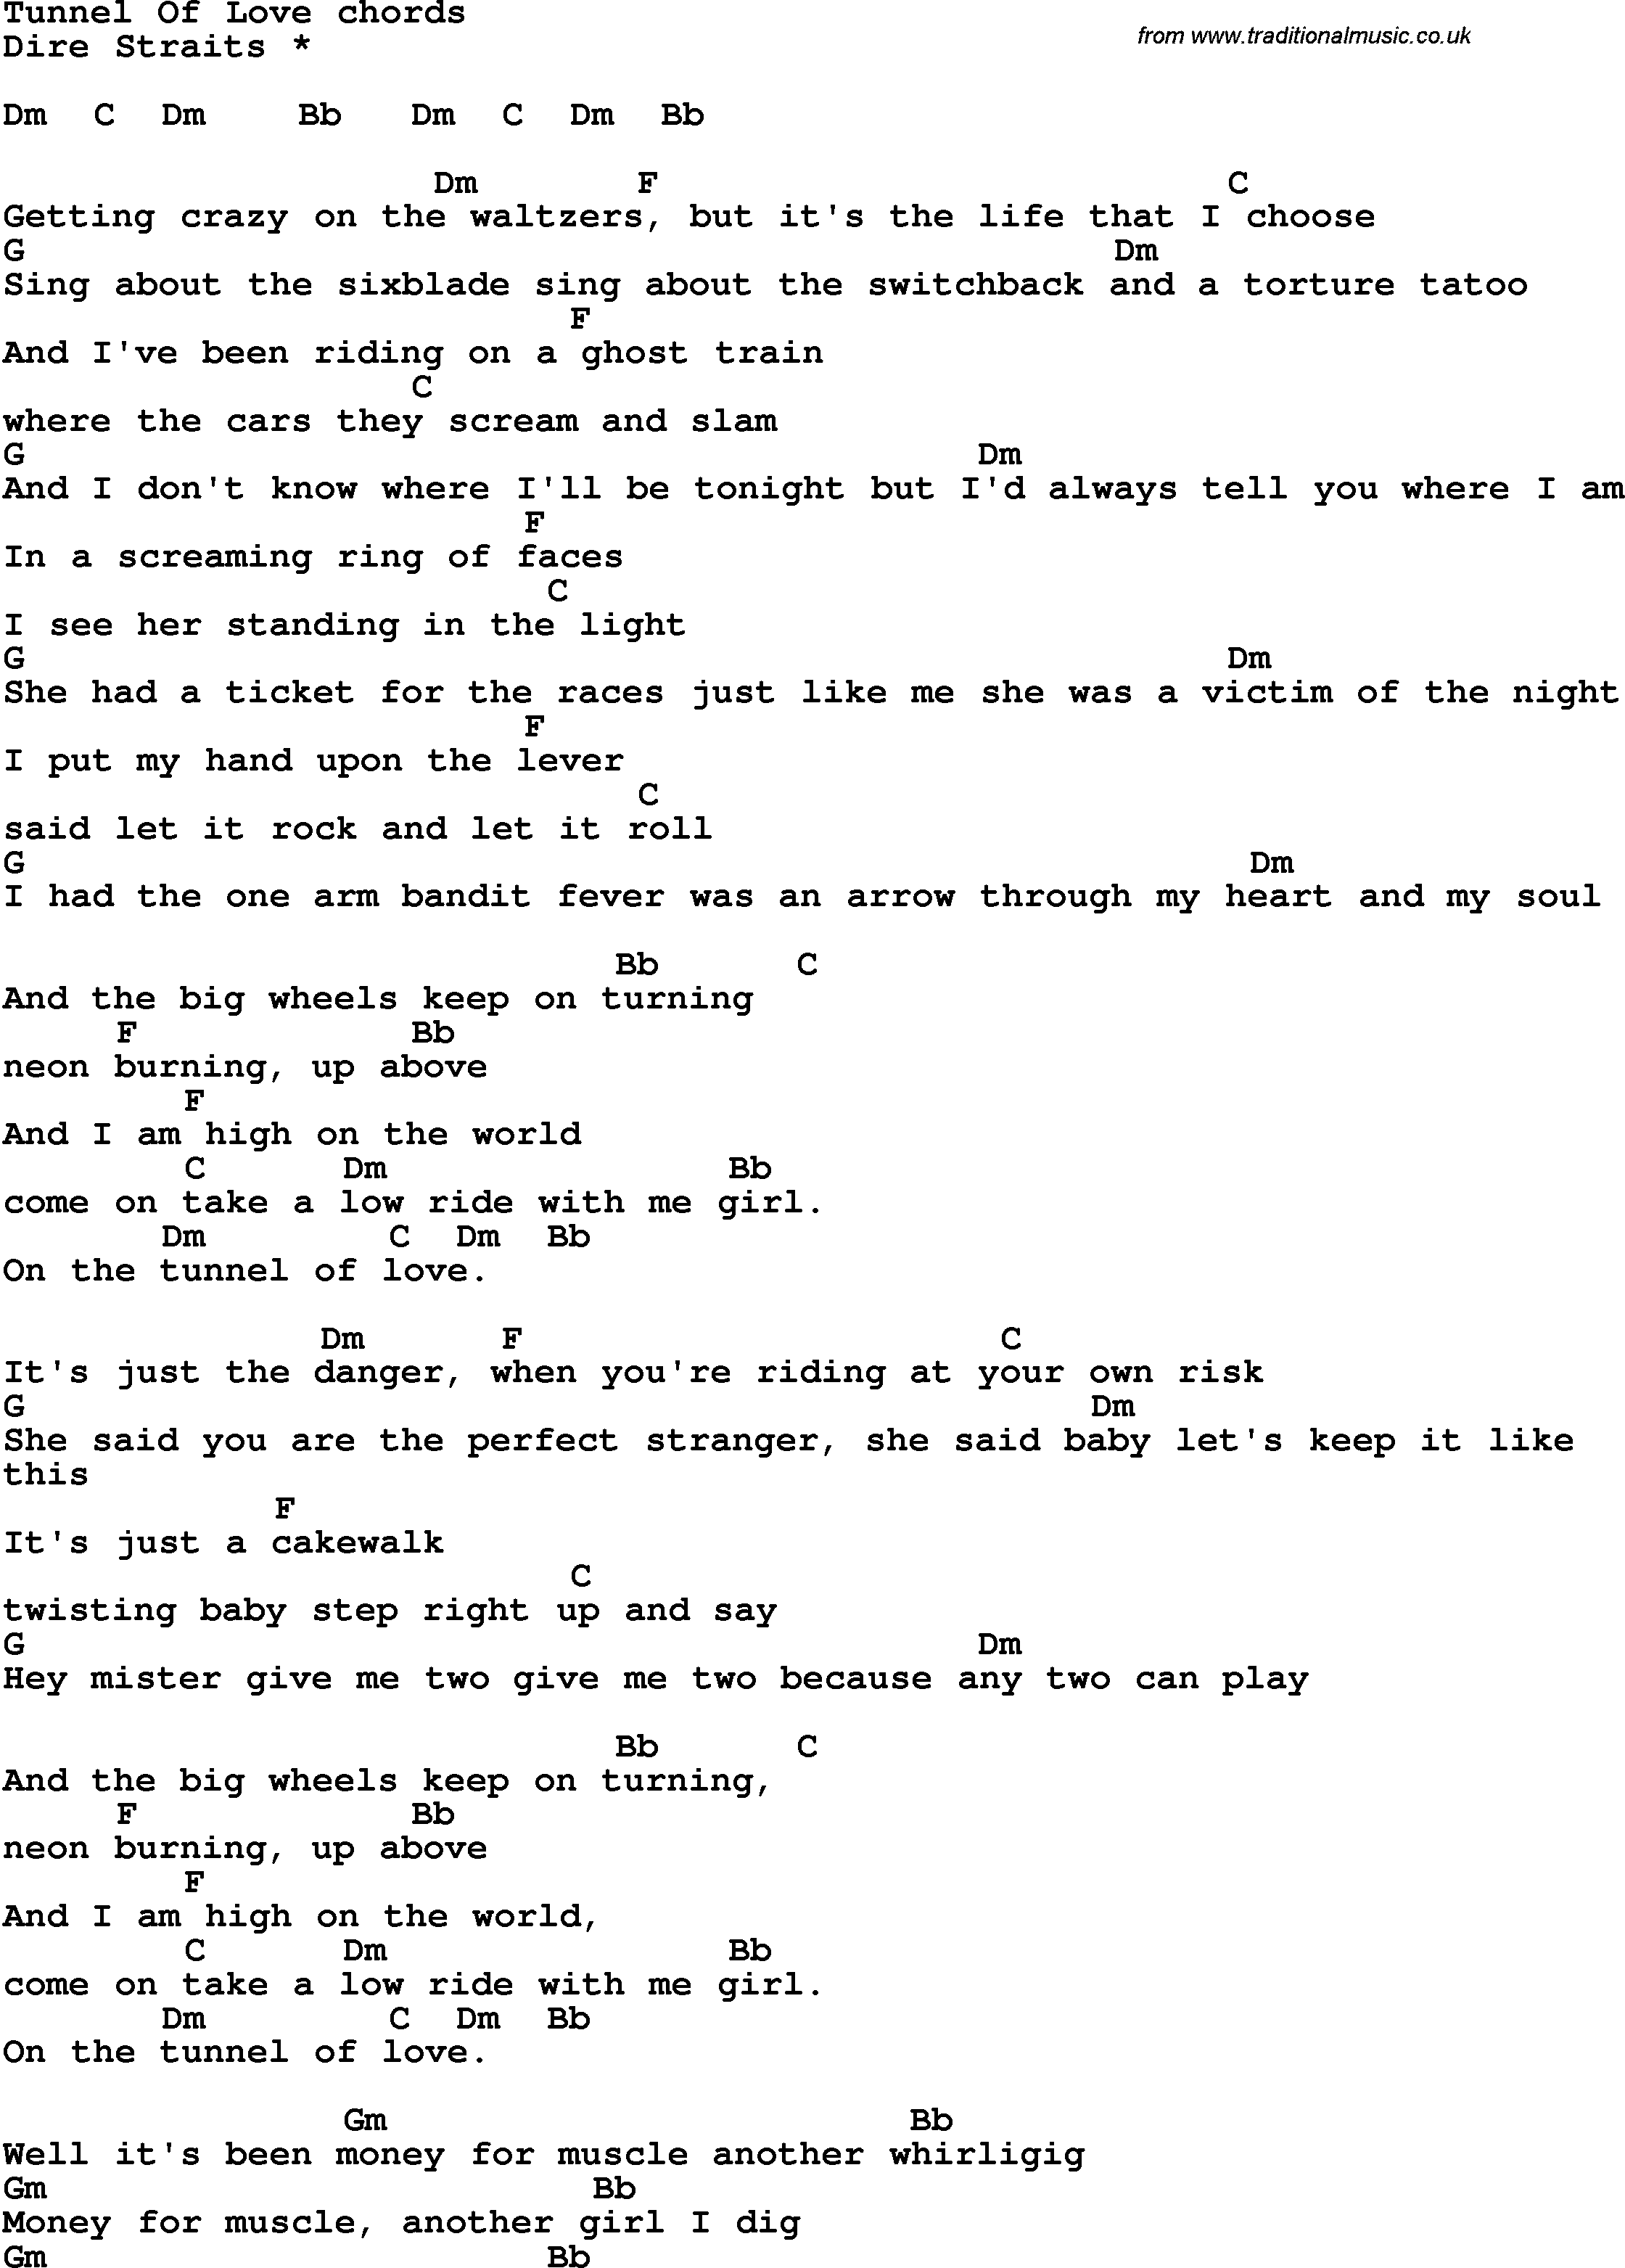 Song Lyrics with guitar chords for Tunnel Of Love